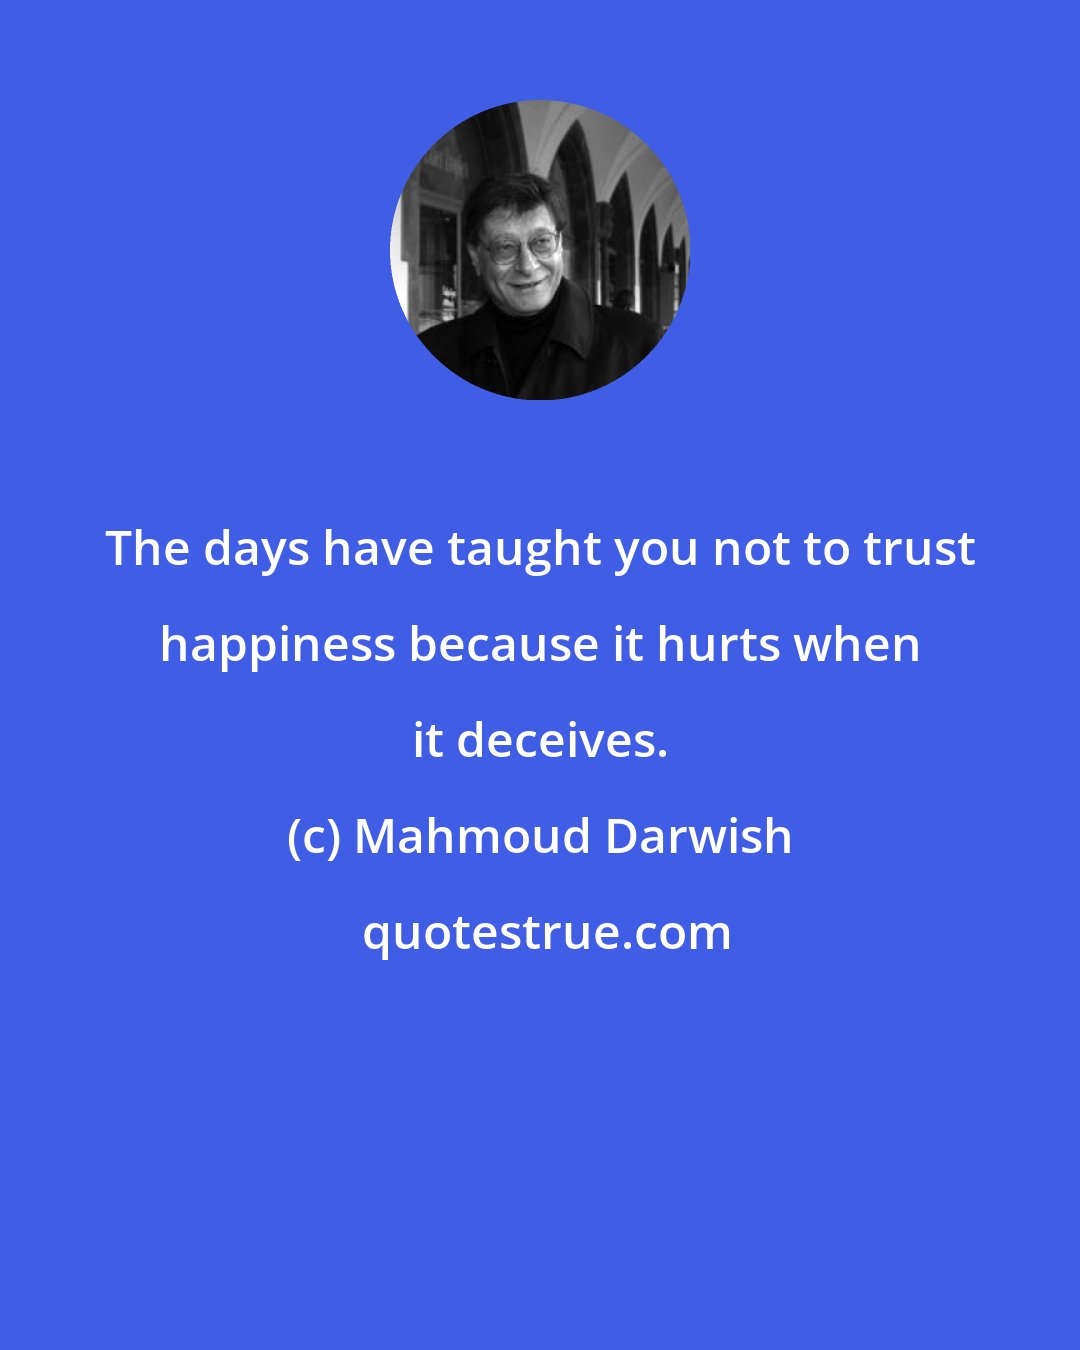 Mahmoud Darwish: The days have taught you not to trust happiness because it hurts when it deceives.